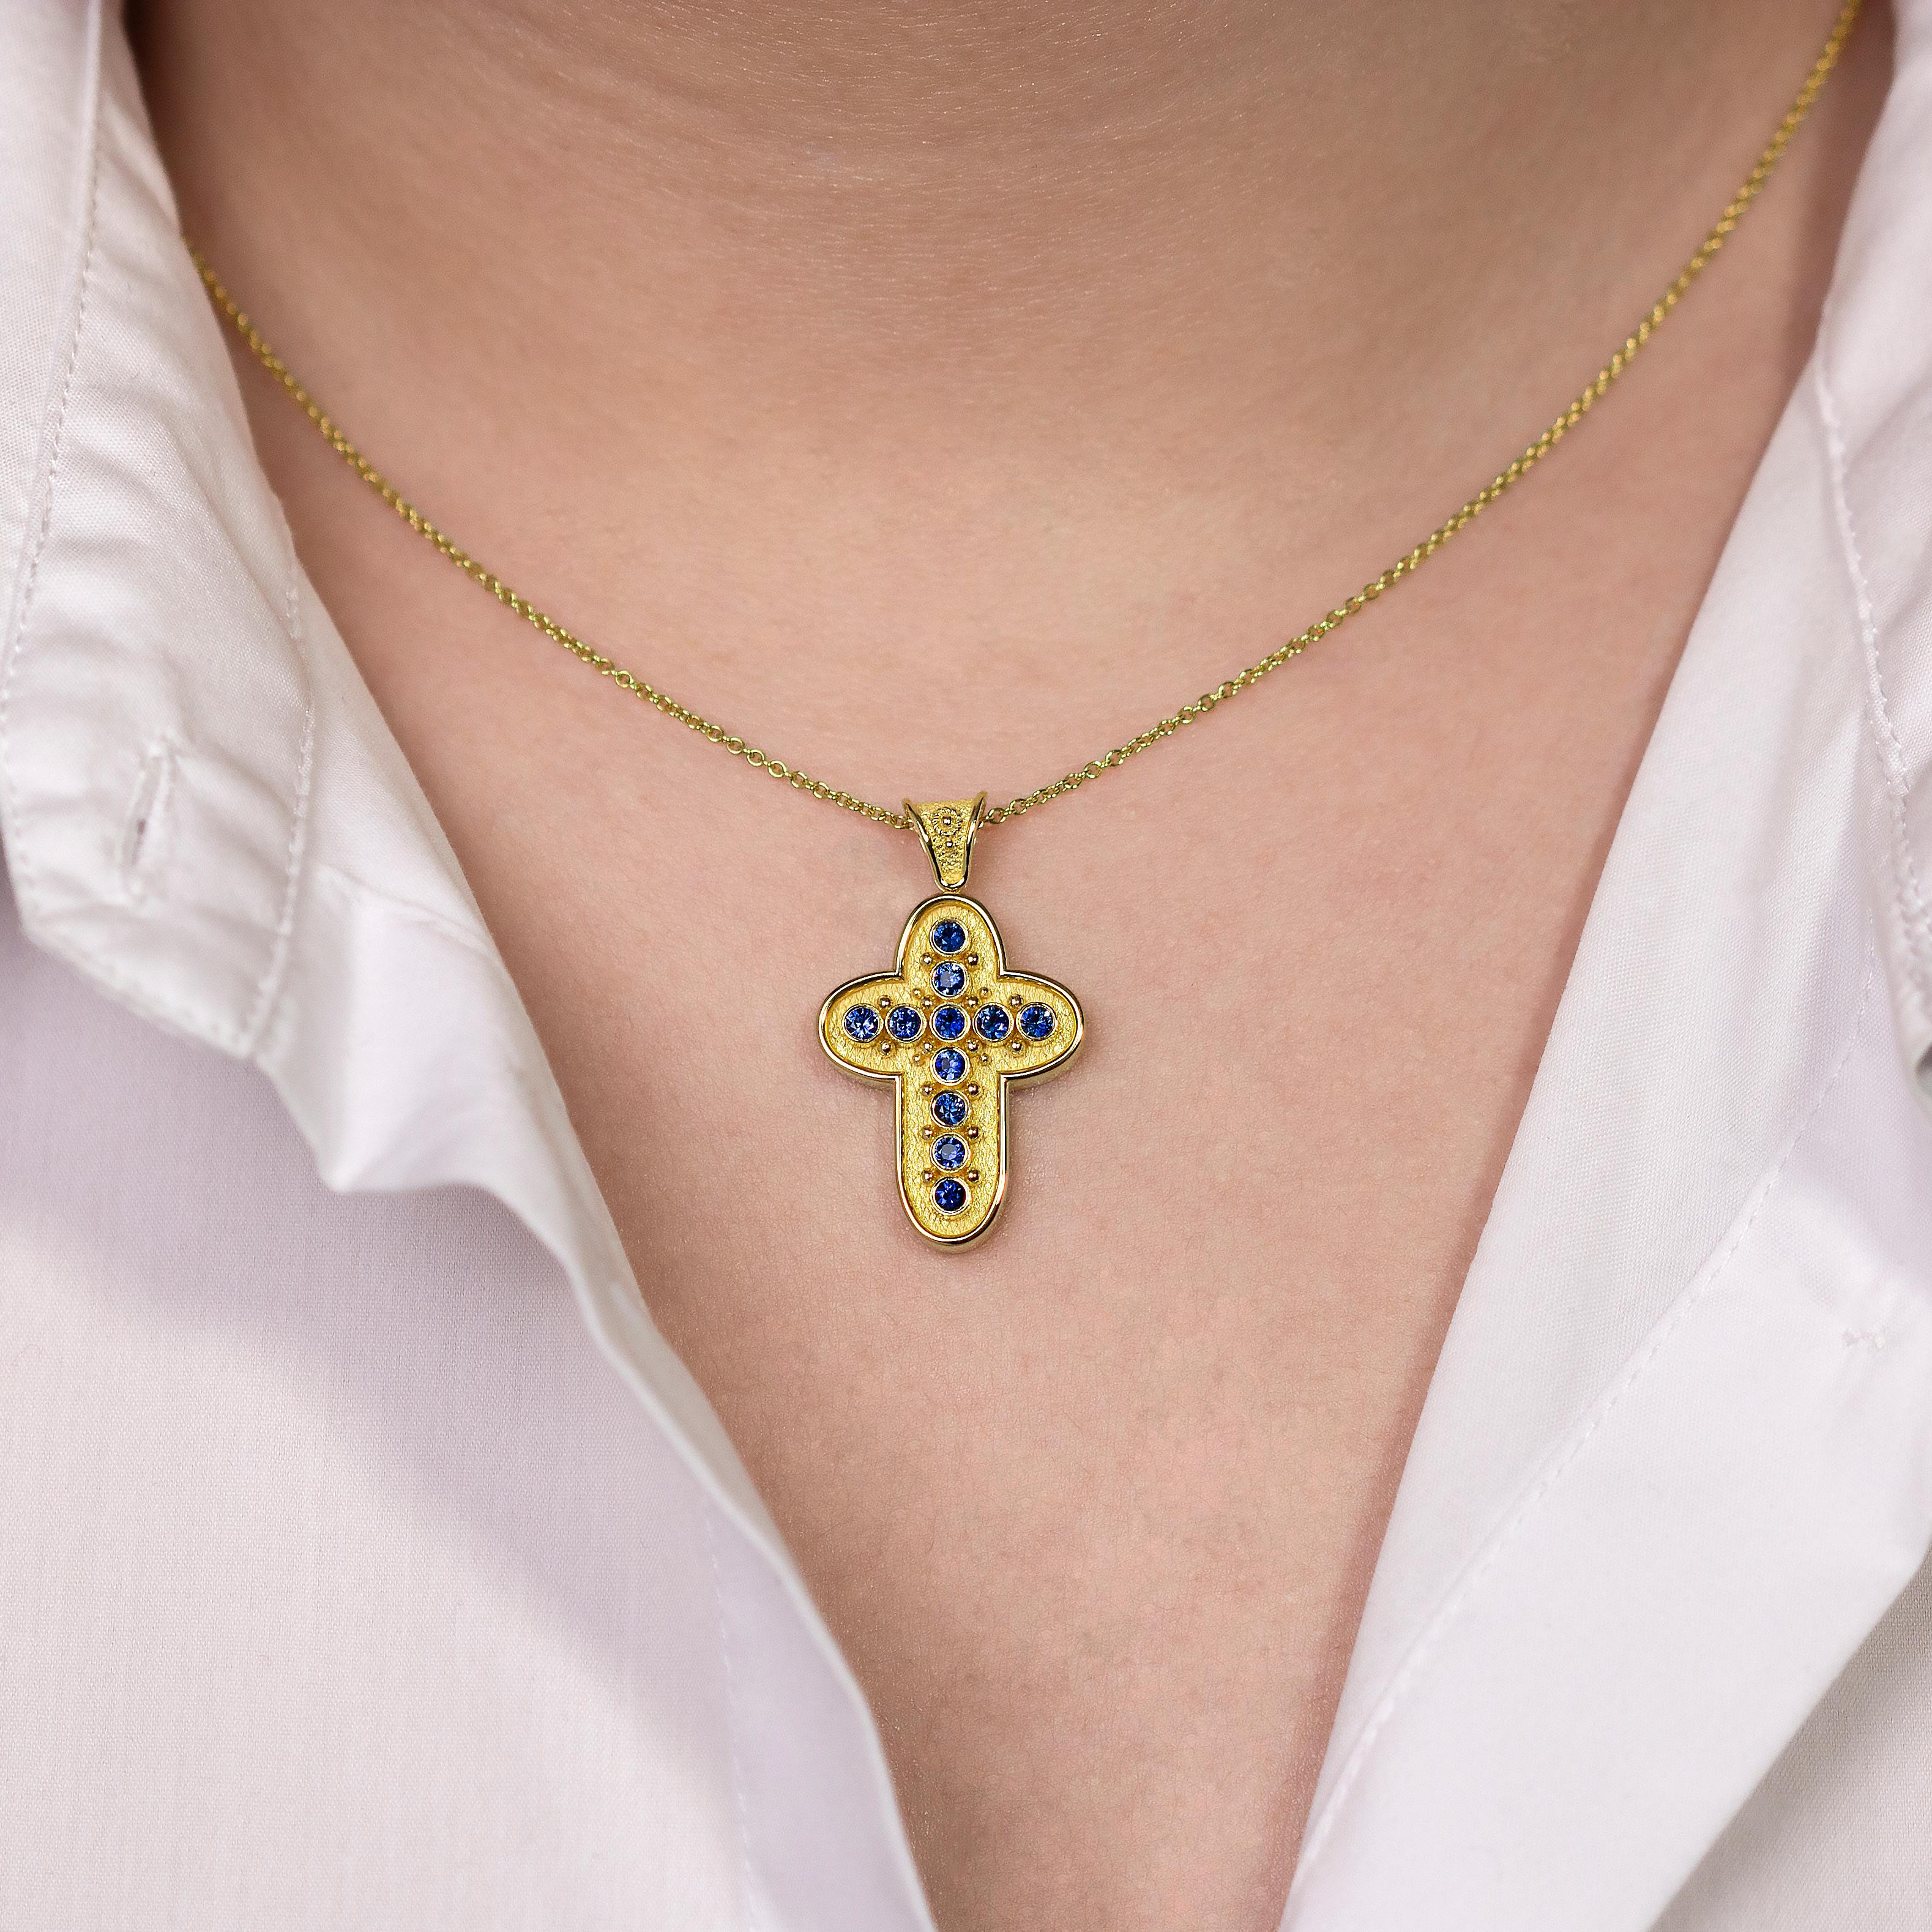 Enhance your allure with a gold cross pendant adorned with radiant round sapphires and intricate granulation details. This masterpiece is a testament to timeless beauty and unparalleled craftsmanship, adding a touch of sophistication to your style.